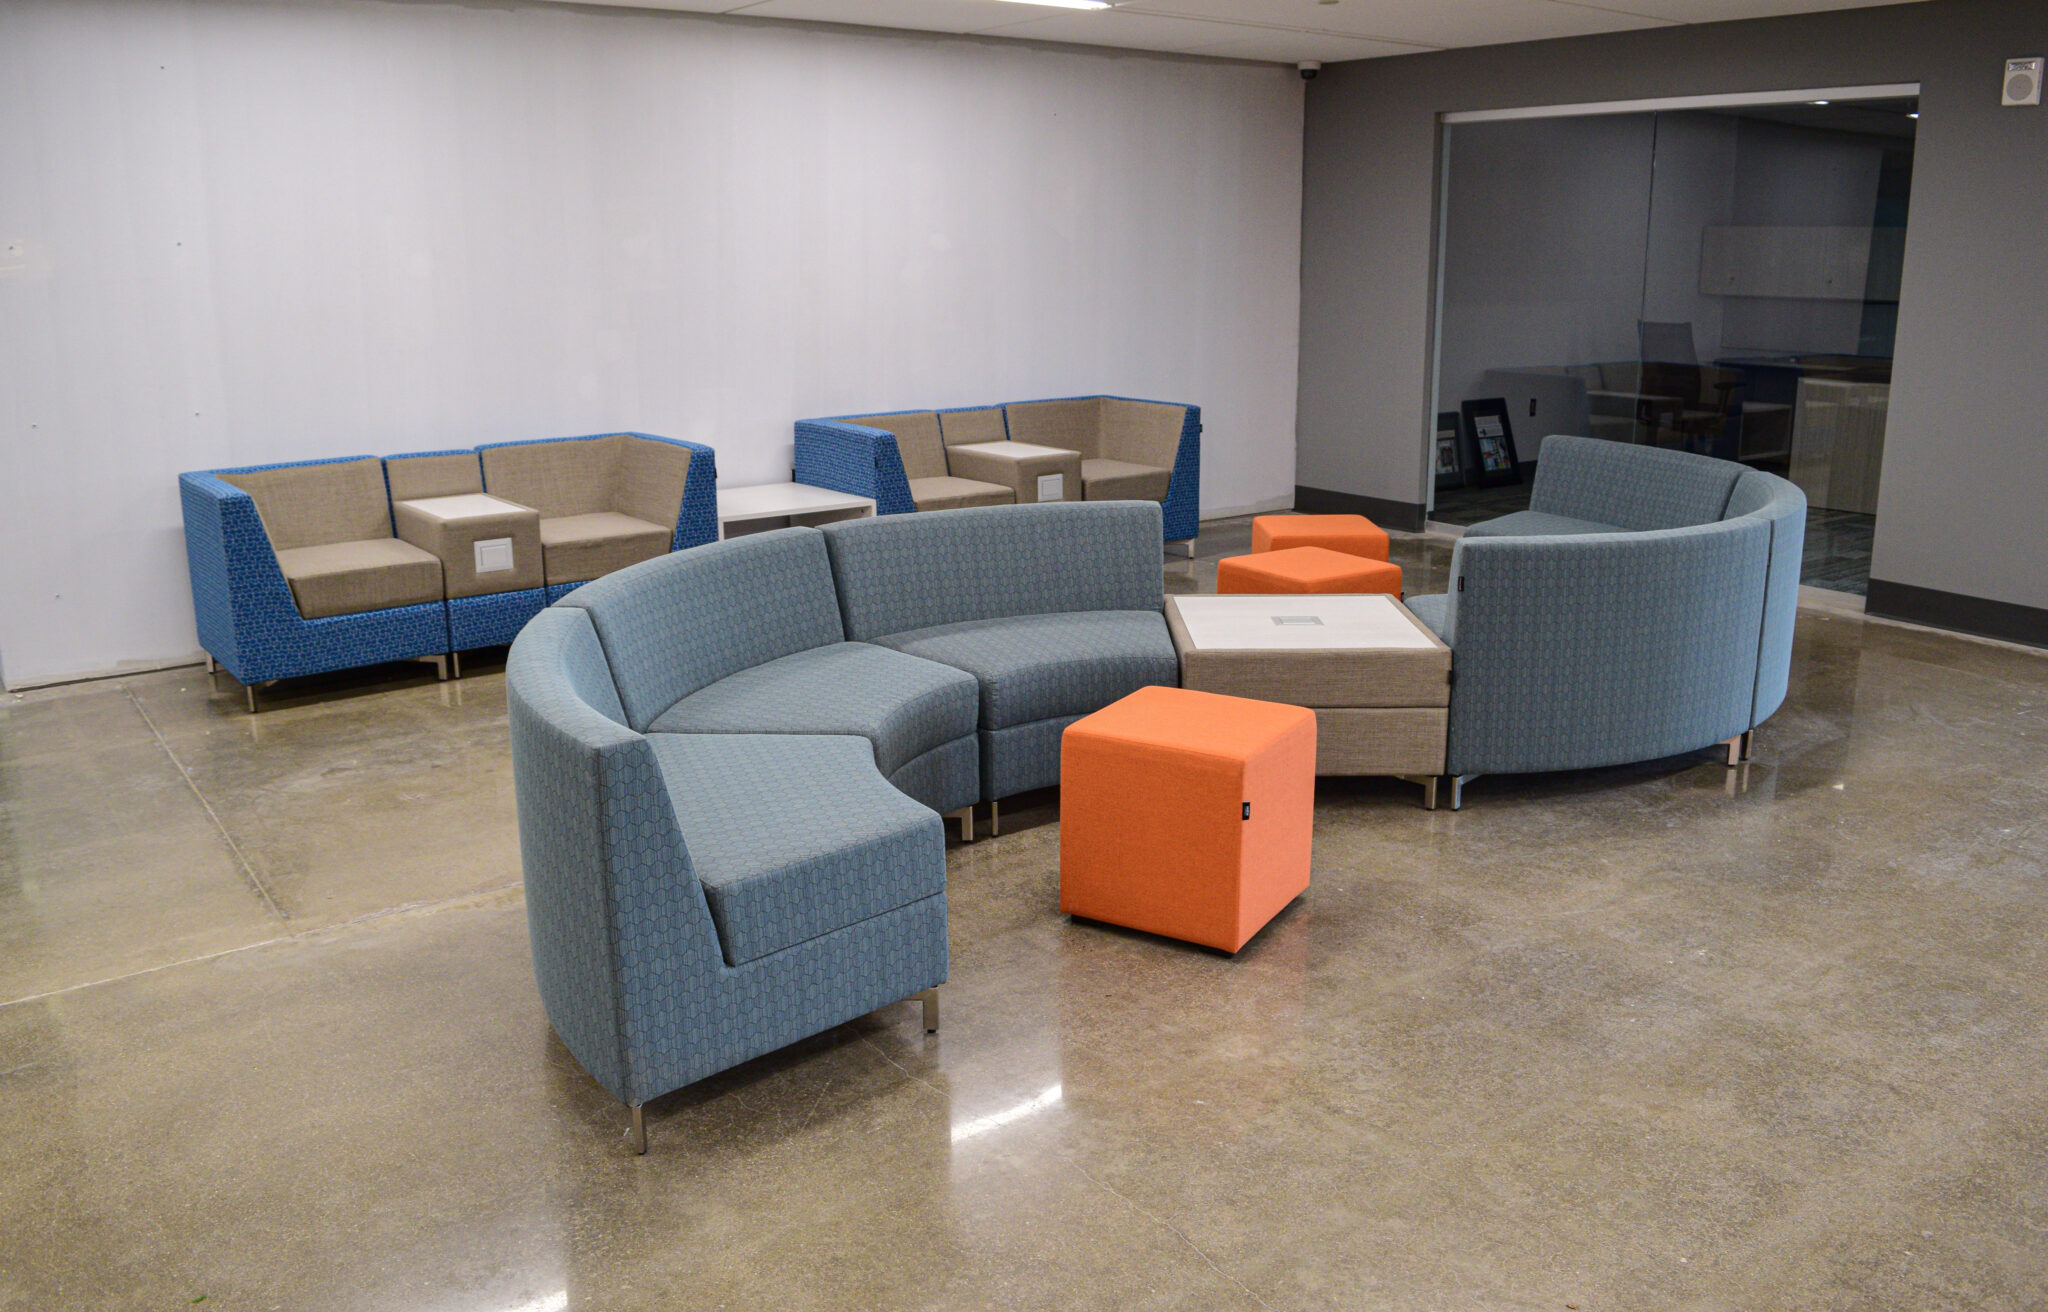 Flexible Modular Classroom Spaces Designed For Teachers And Scholars